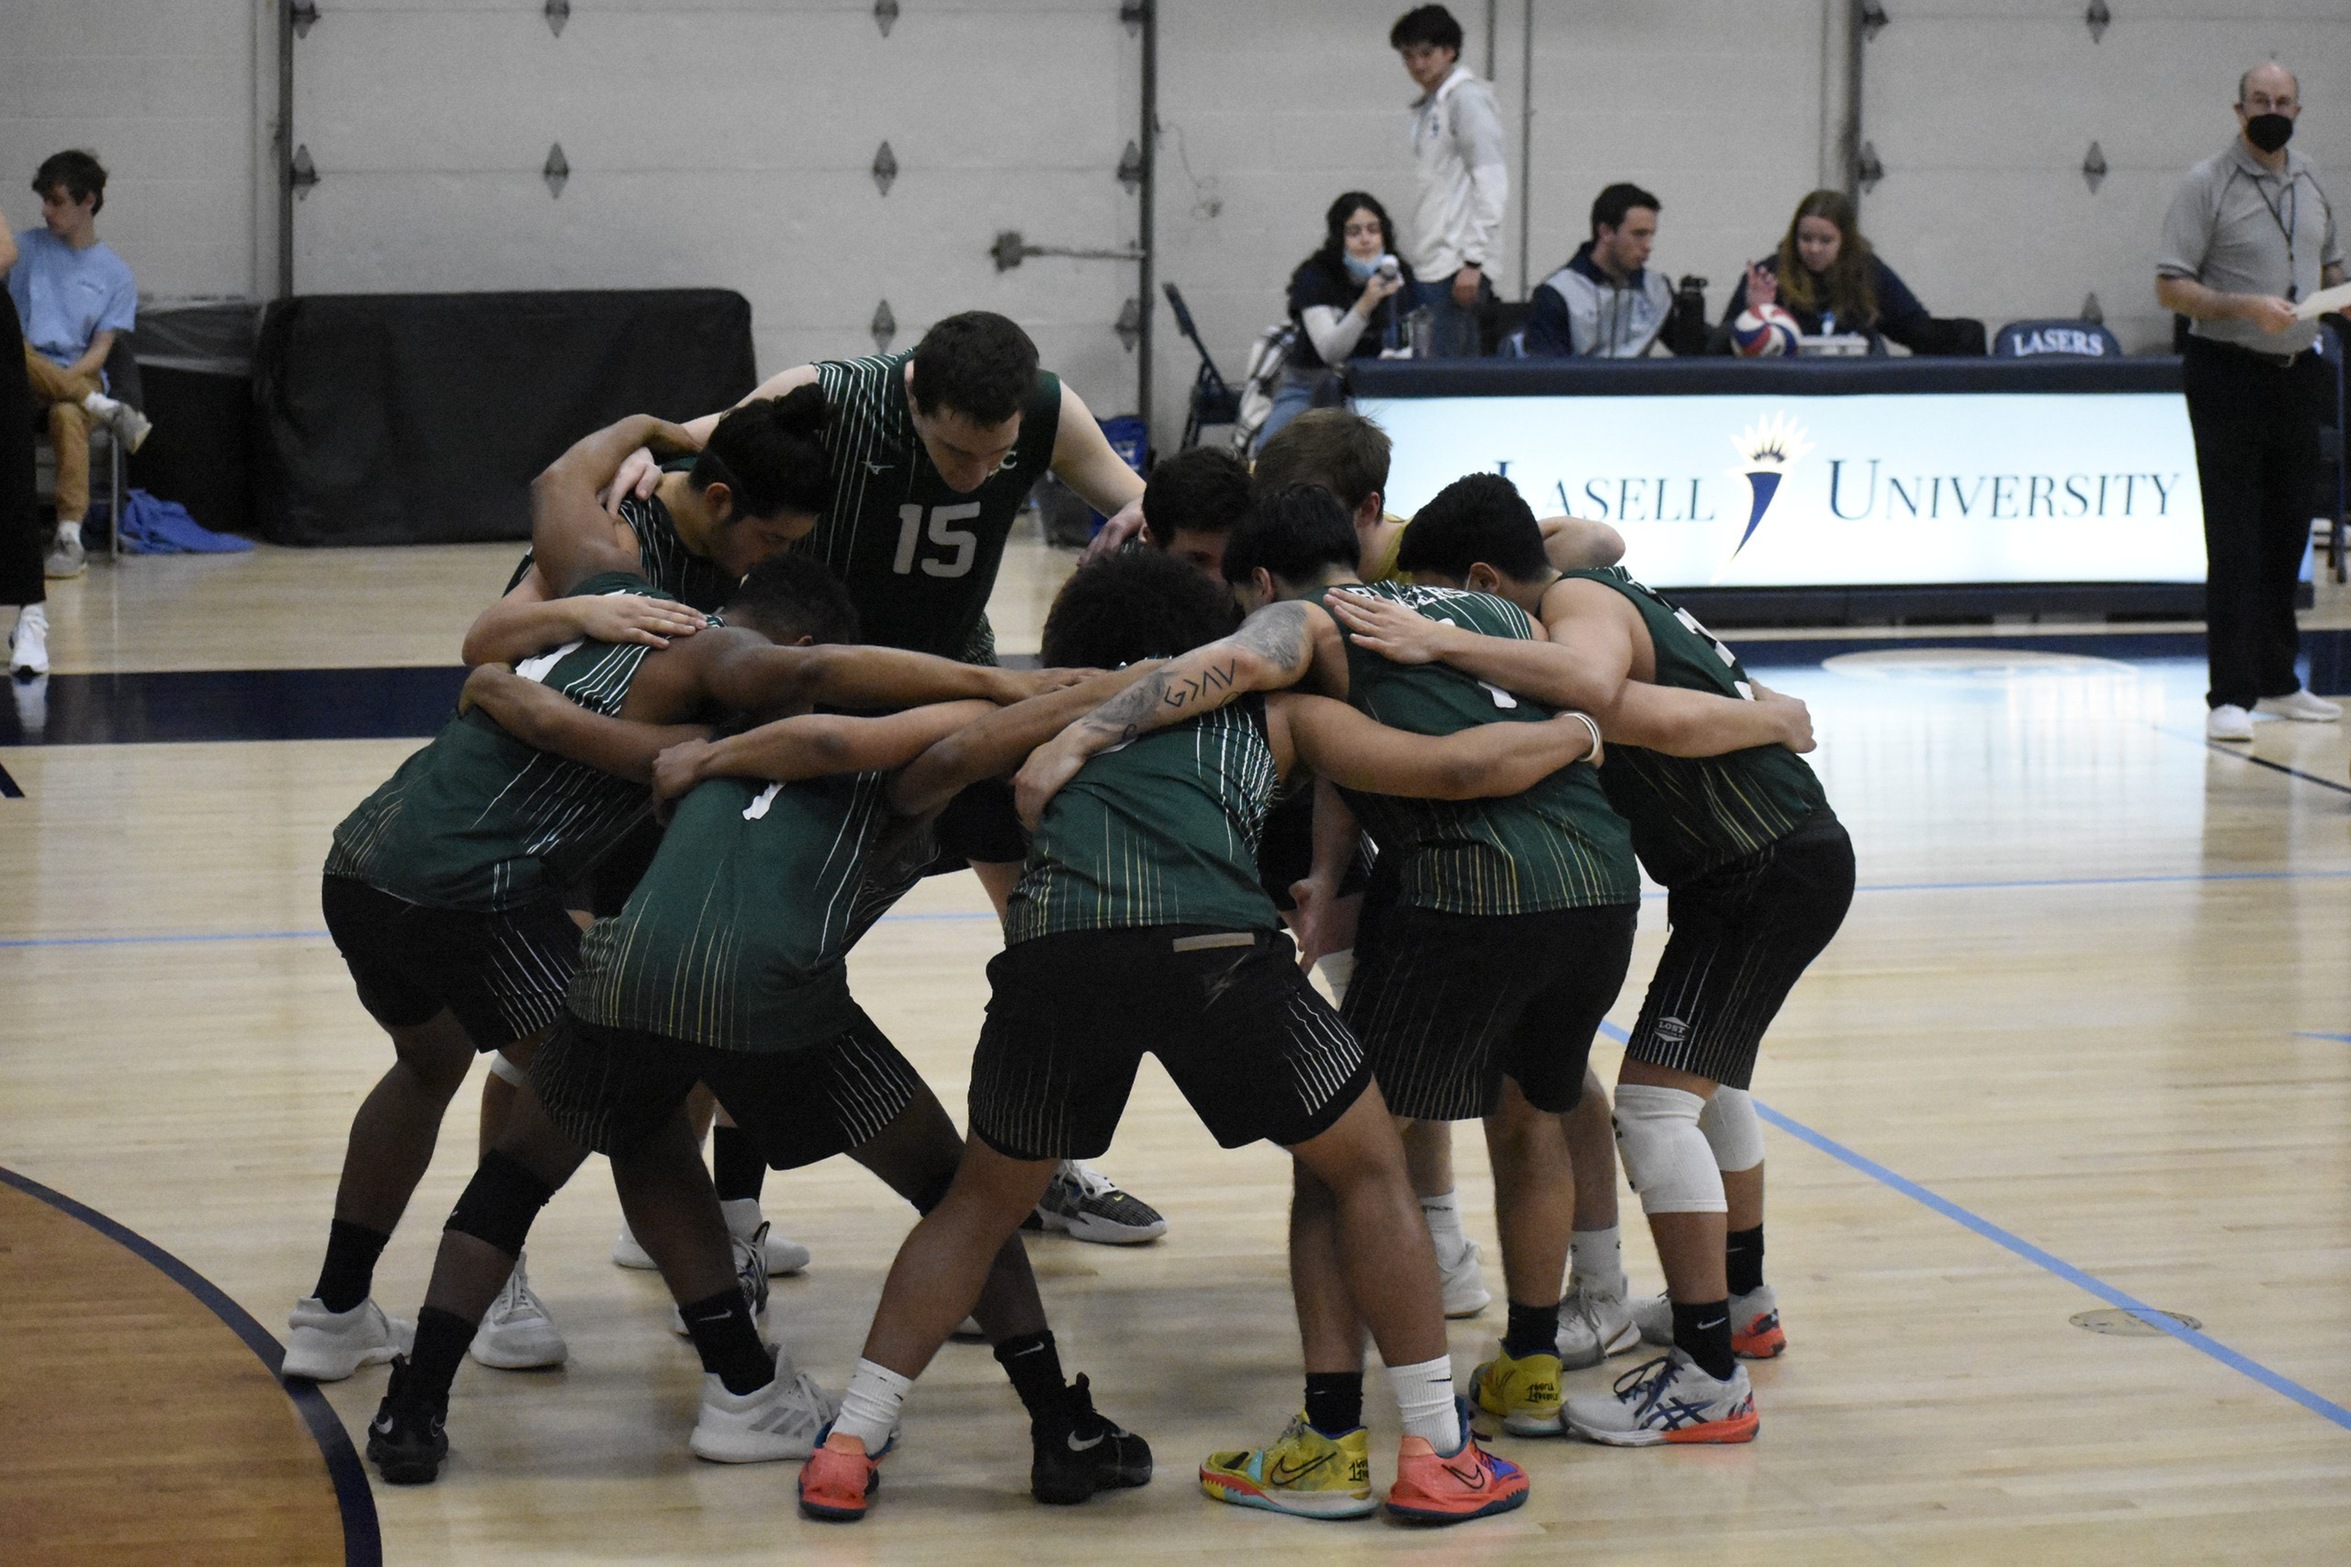 Men's Volleyball get Dealt a Pair of Losses in Tri-Match over the Weekend